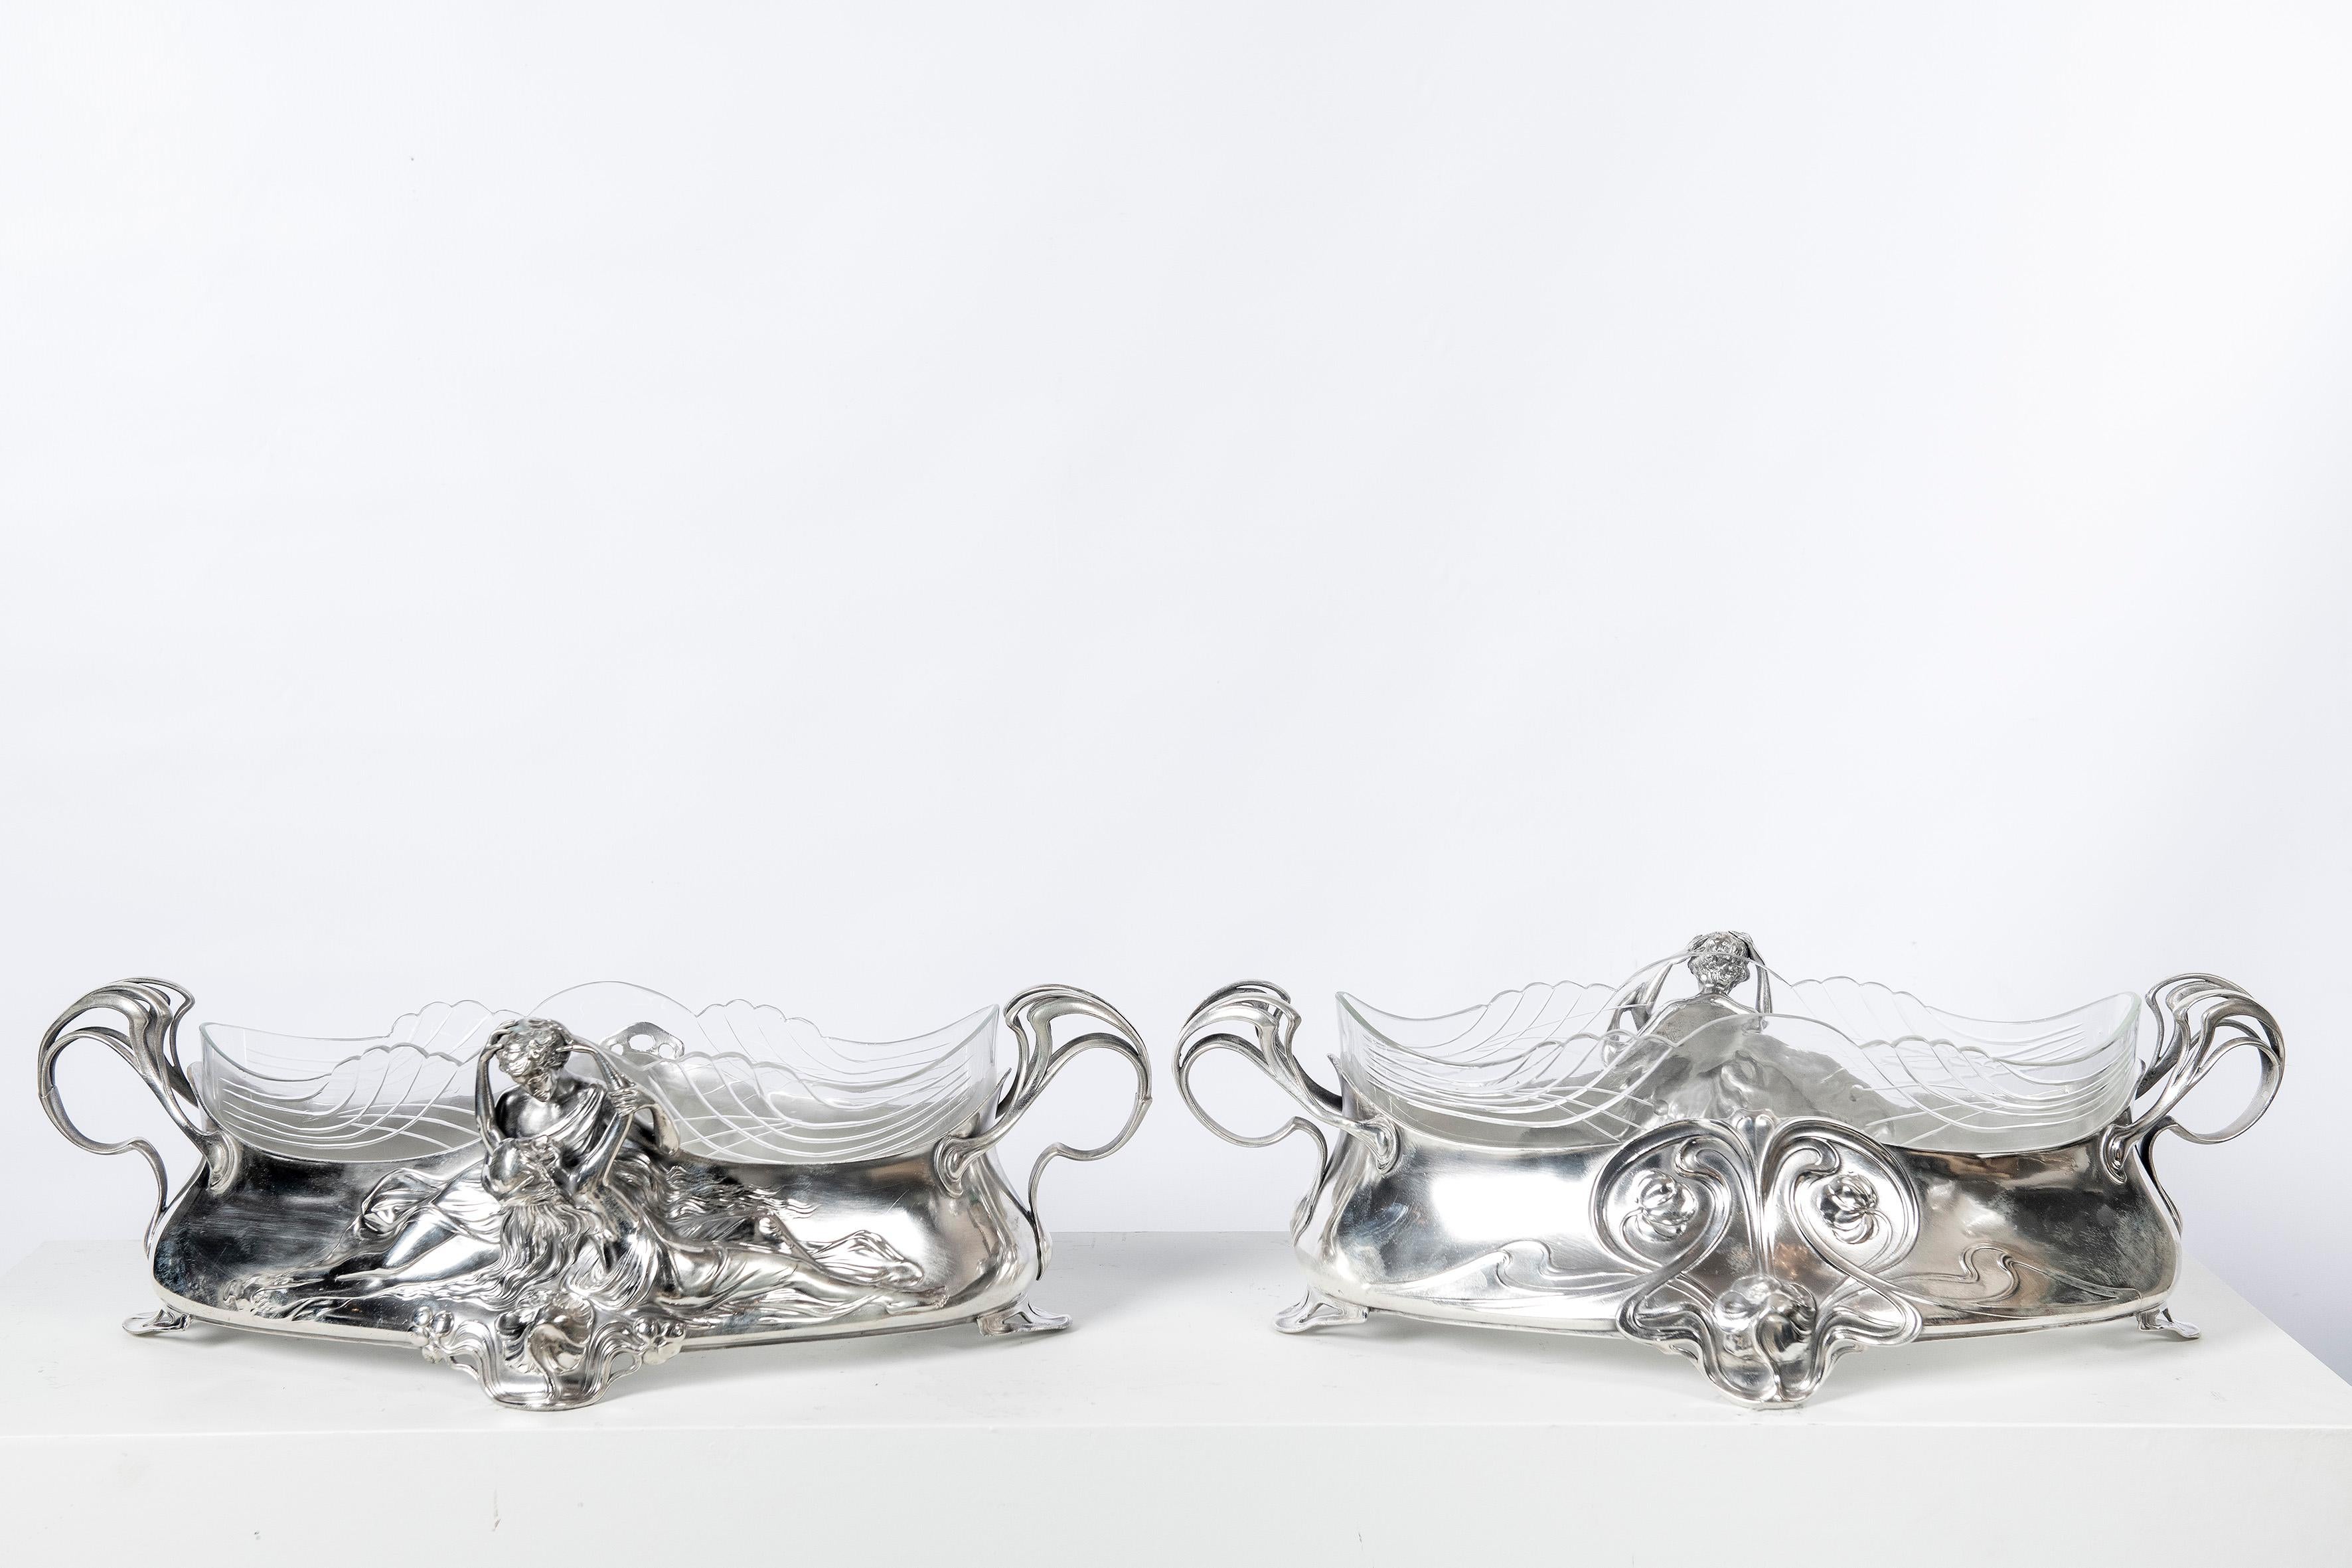 Pair of W.M.F. silver plate jardinière with glass. Jugendstil style. Germany, circa 1900.